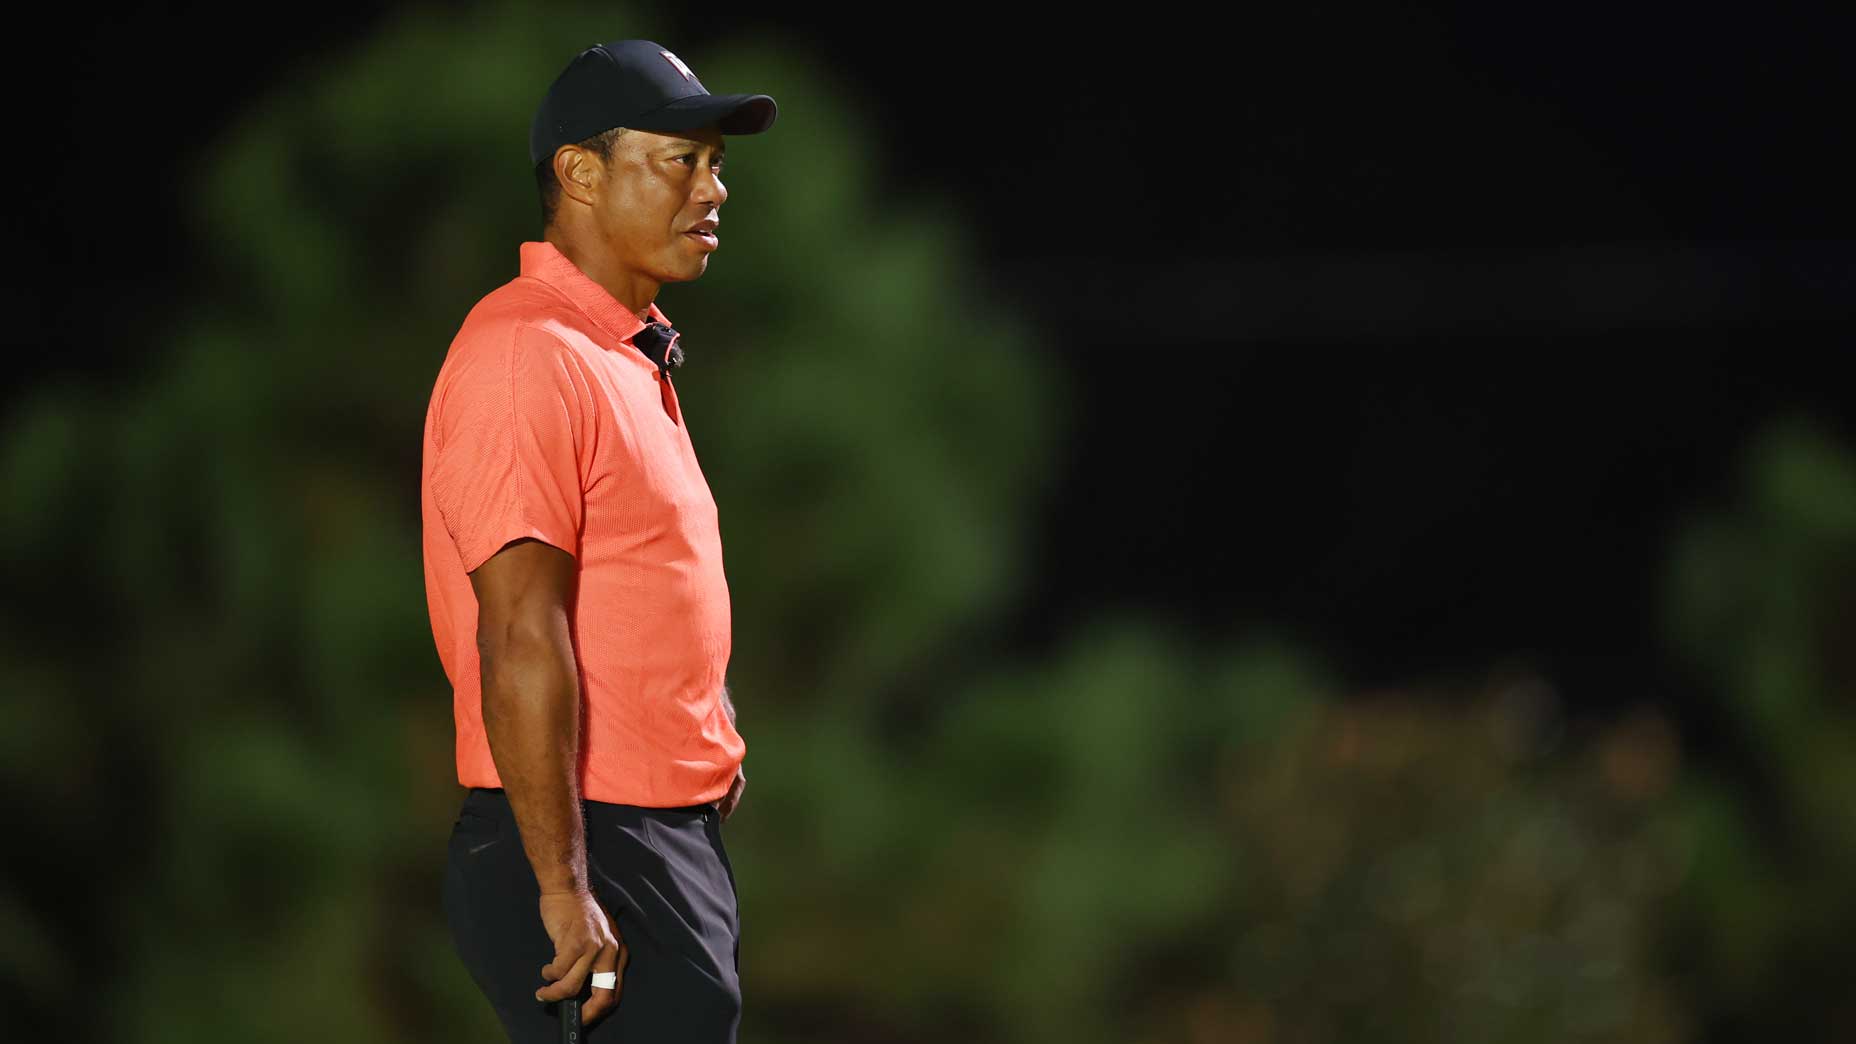 The ceremonial era for Tiger Woods will help us prepare for the end